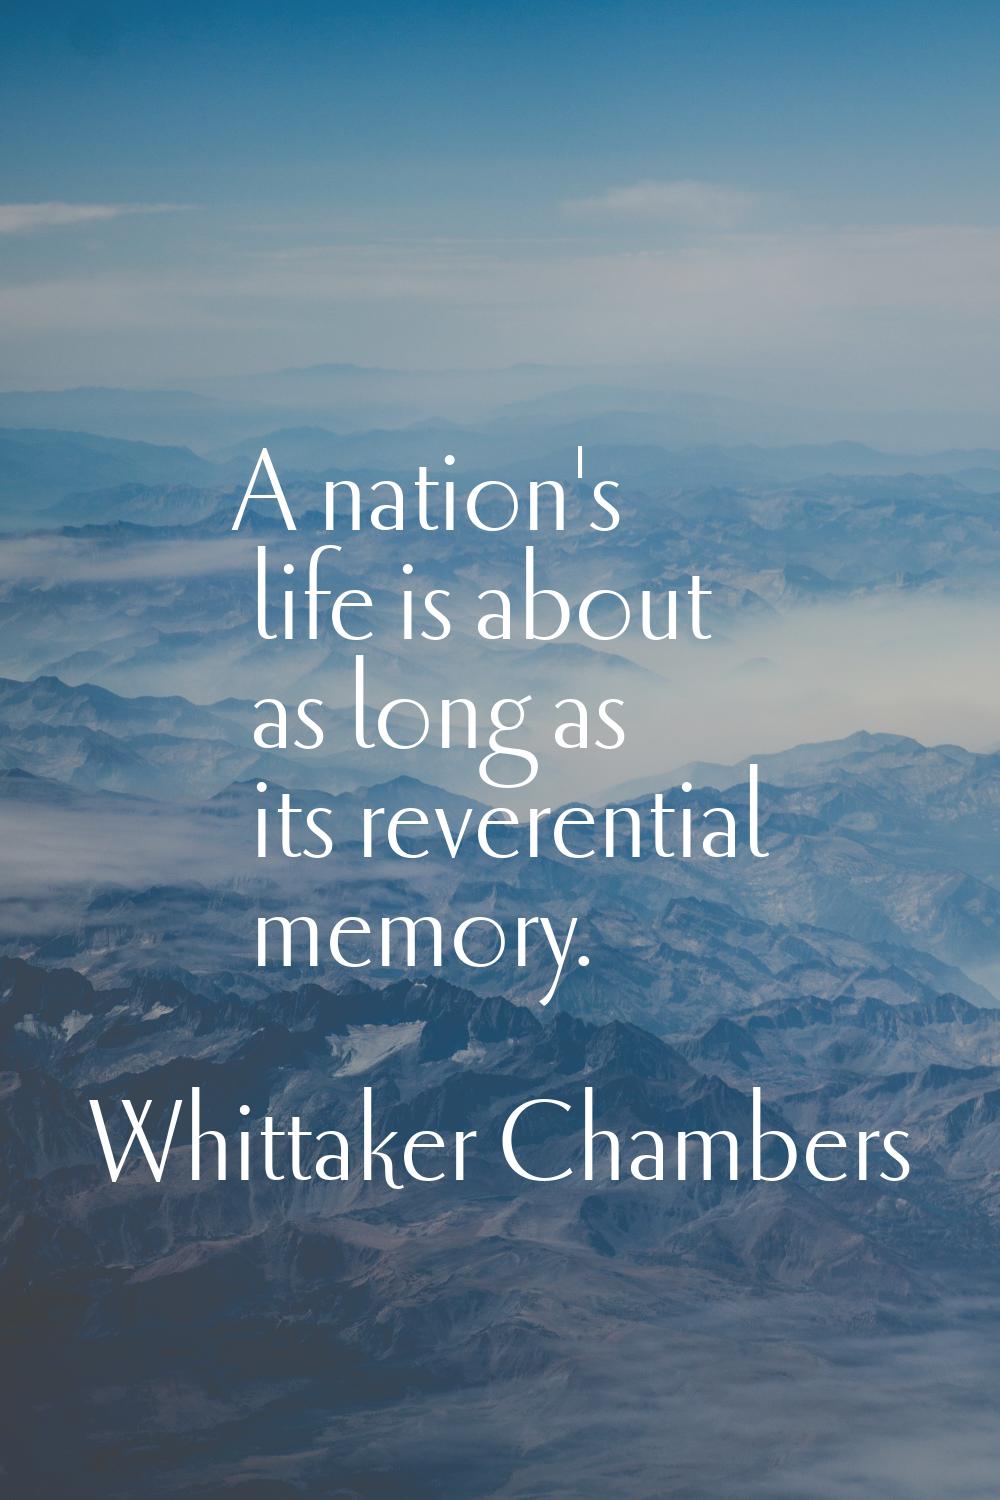 A nation's life is about as long as its reverential memory.